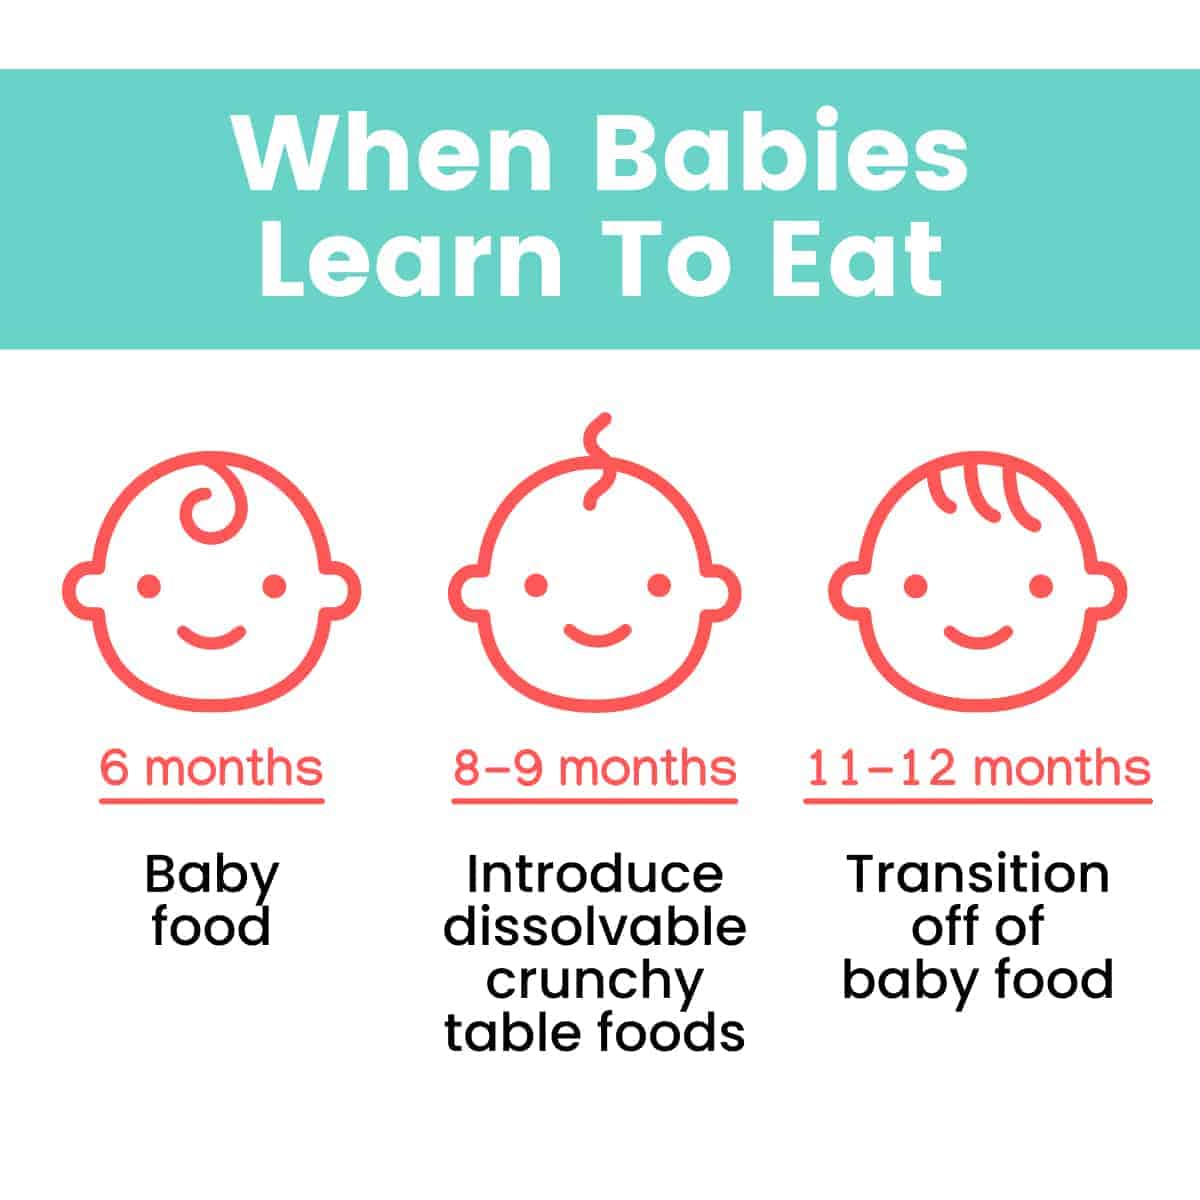 Learn when babies start eating table foods and how to transition them to eating table and finger foods. With this plan from an occupational therapist, you'll feel confident you're doing it safely!